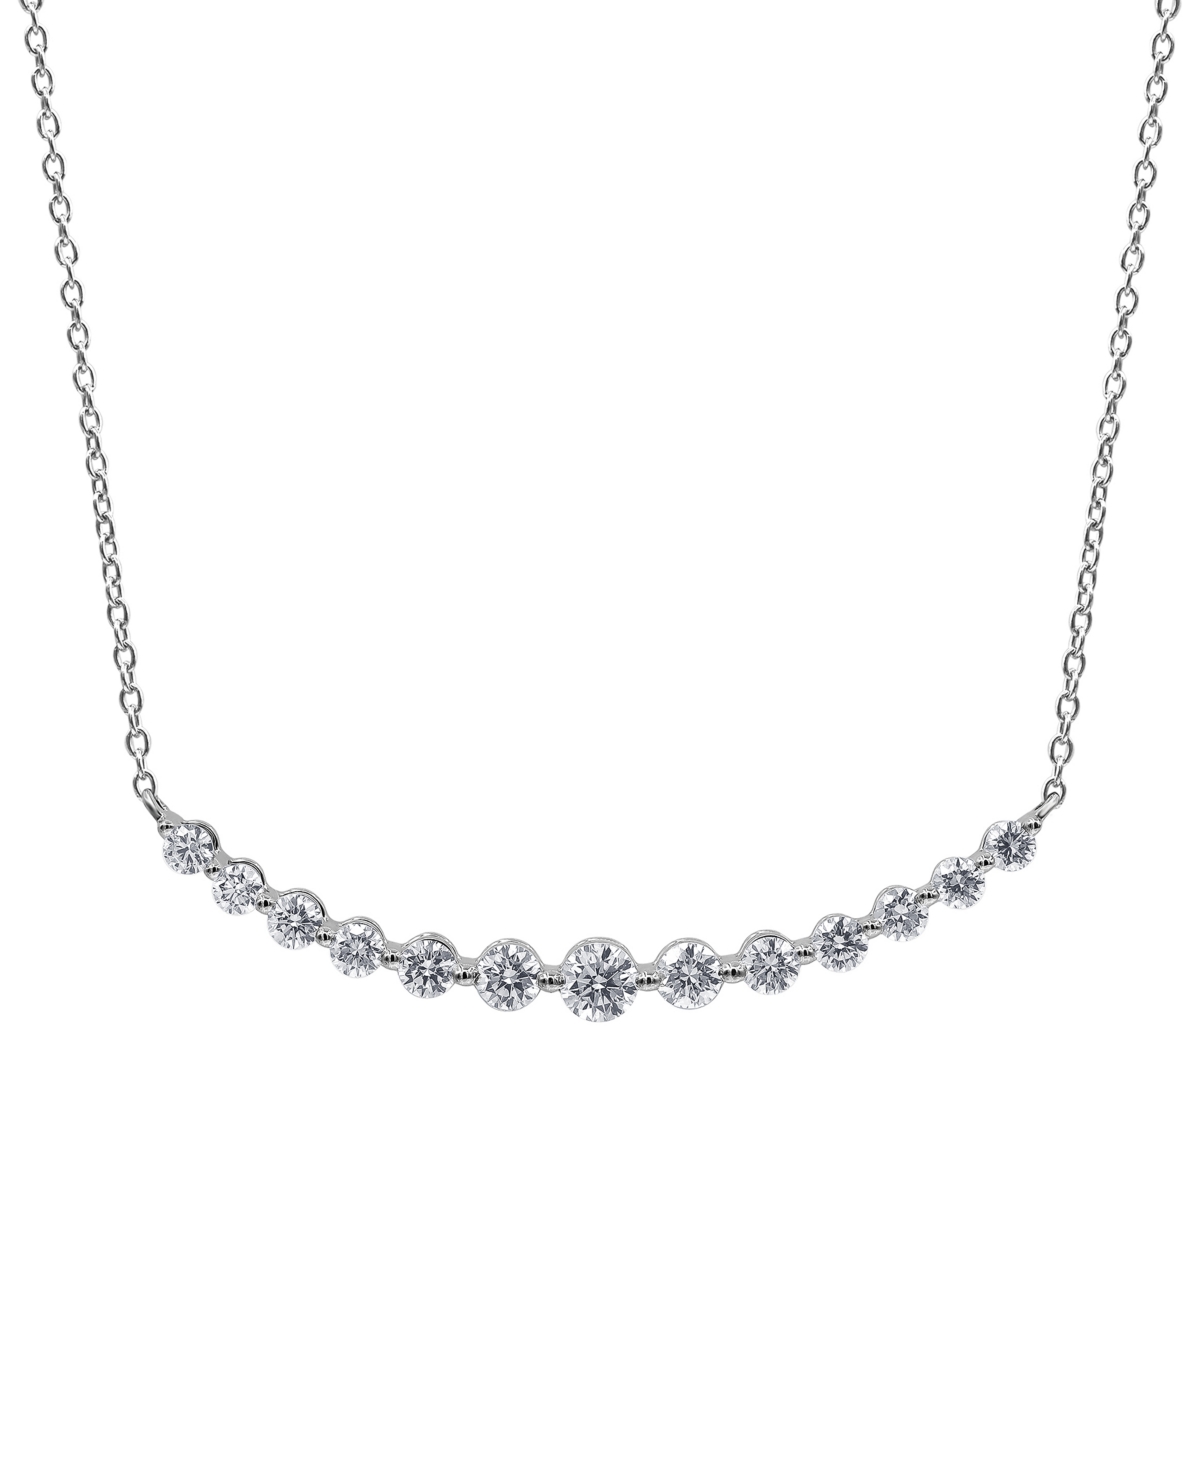 Lab Grown Diamond Curved Bar Collar Necklace (1 ct. t.w.) in 14k White Gold, 16" + 2" extender - White Gold